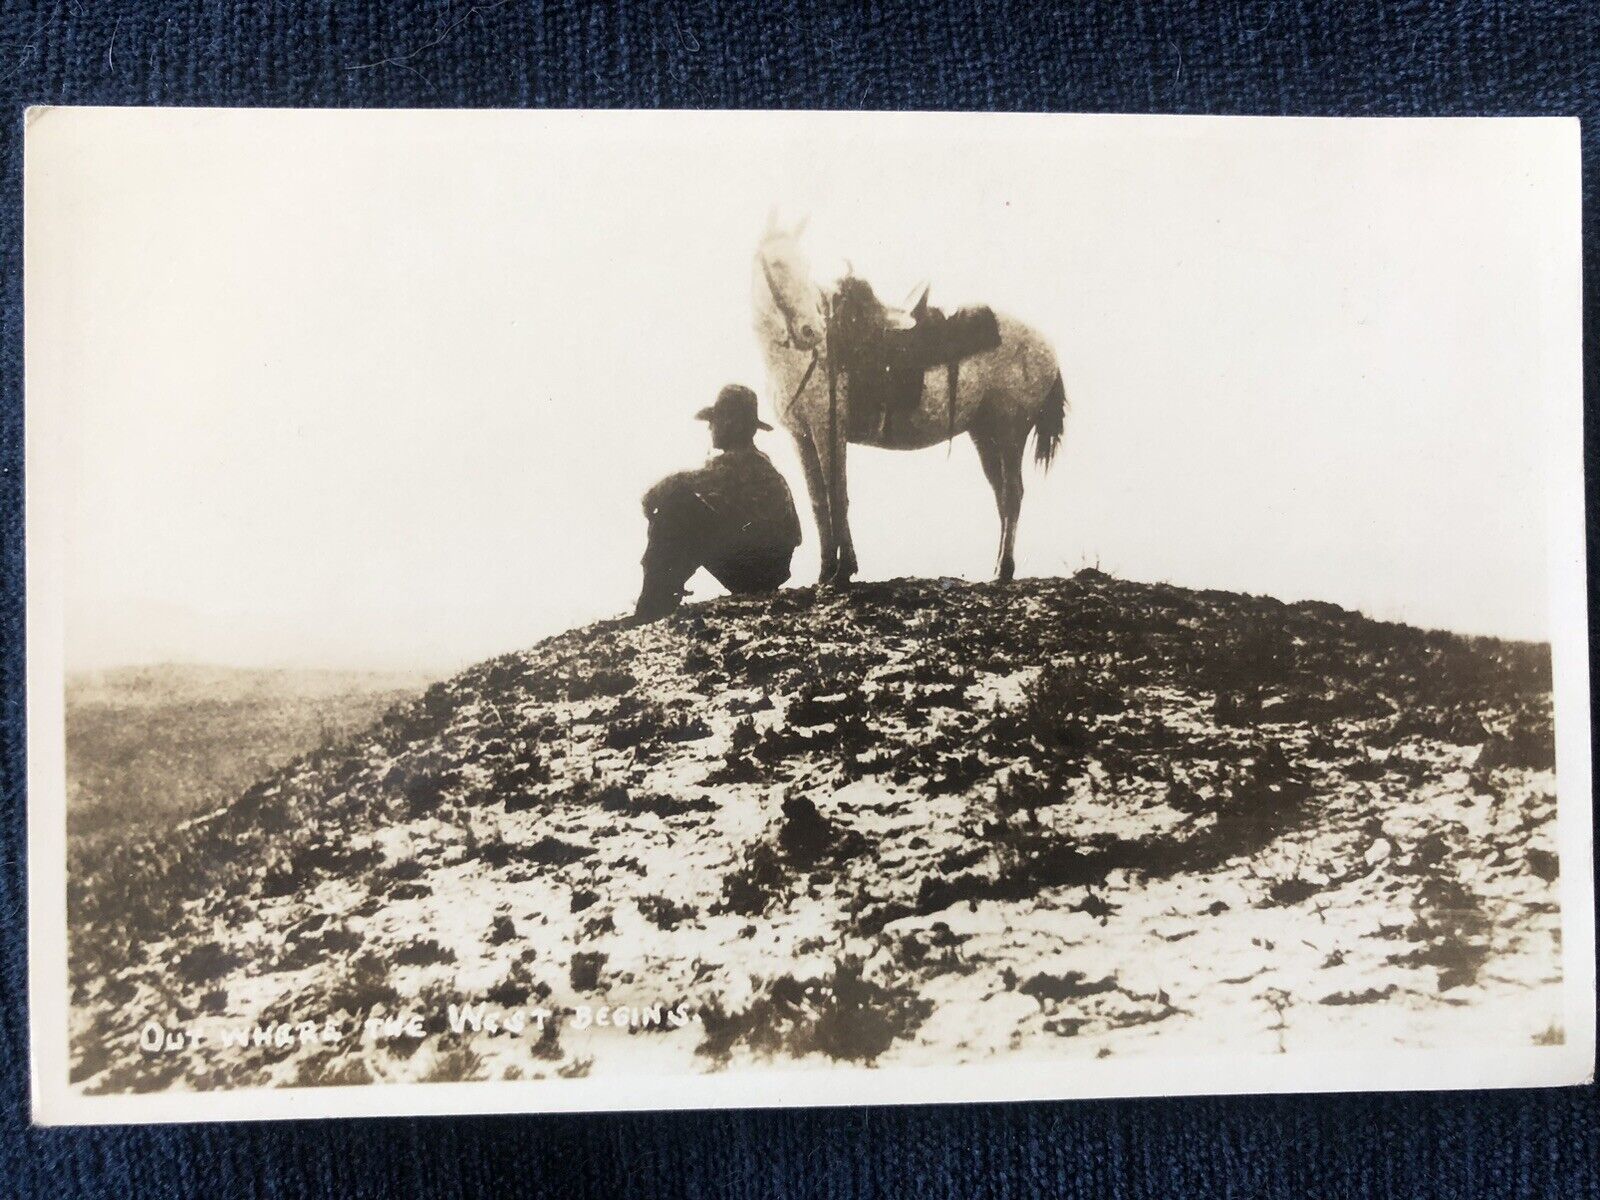 Vintage RPPC Cowboy & Horse “Out Where The West Begins”